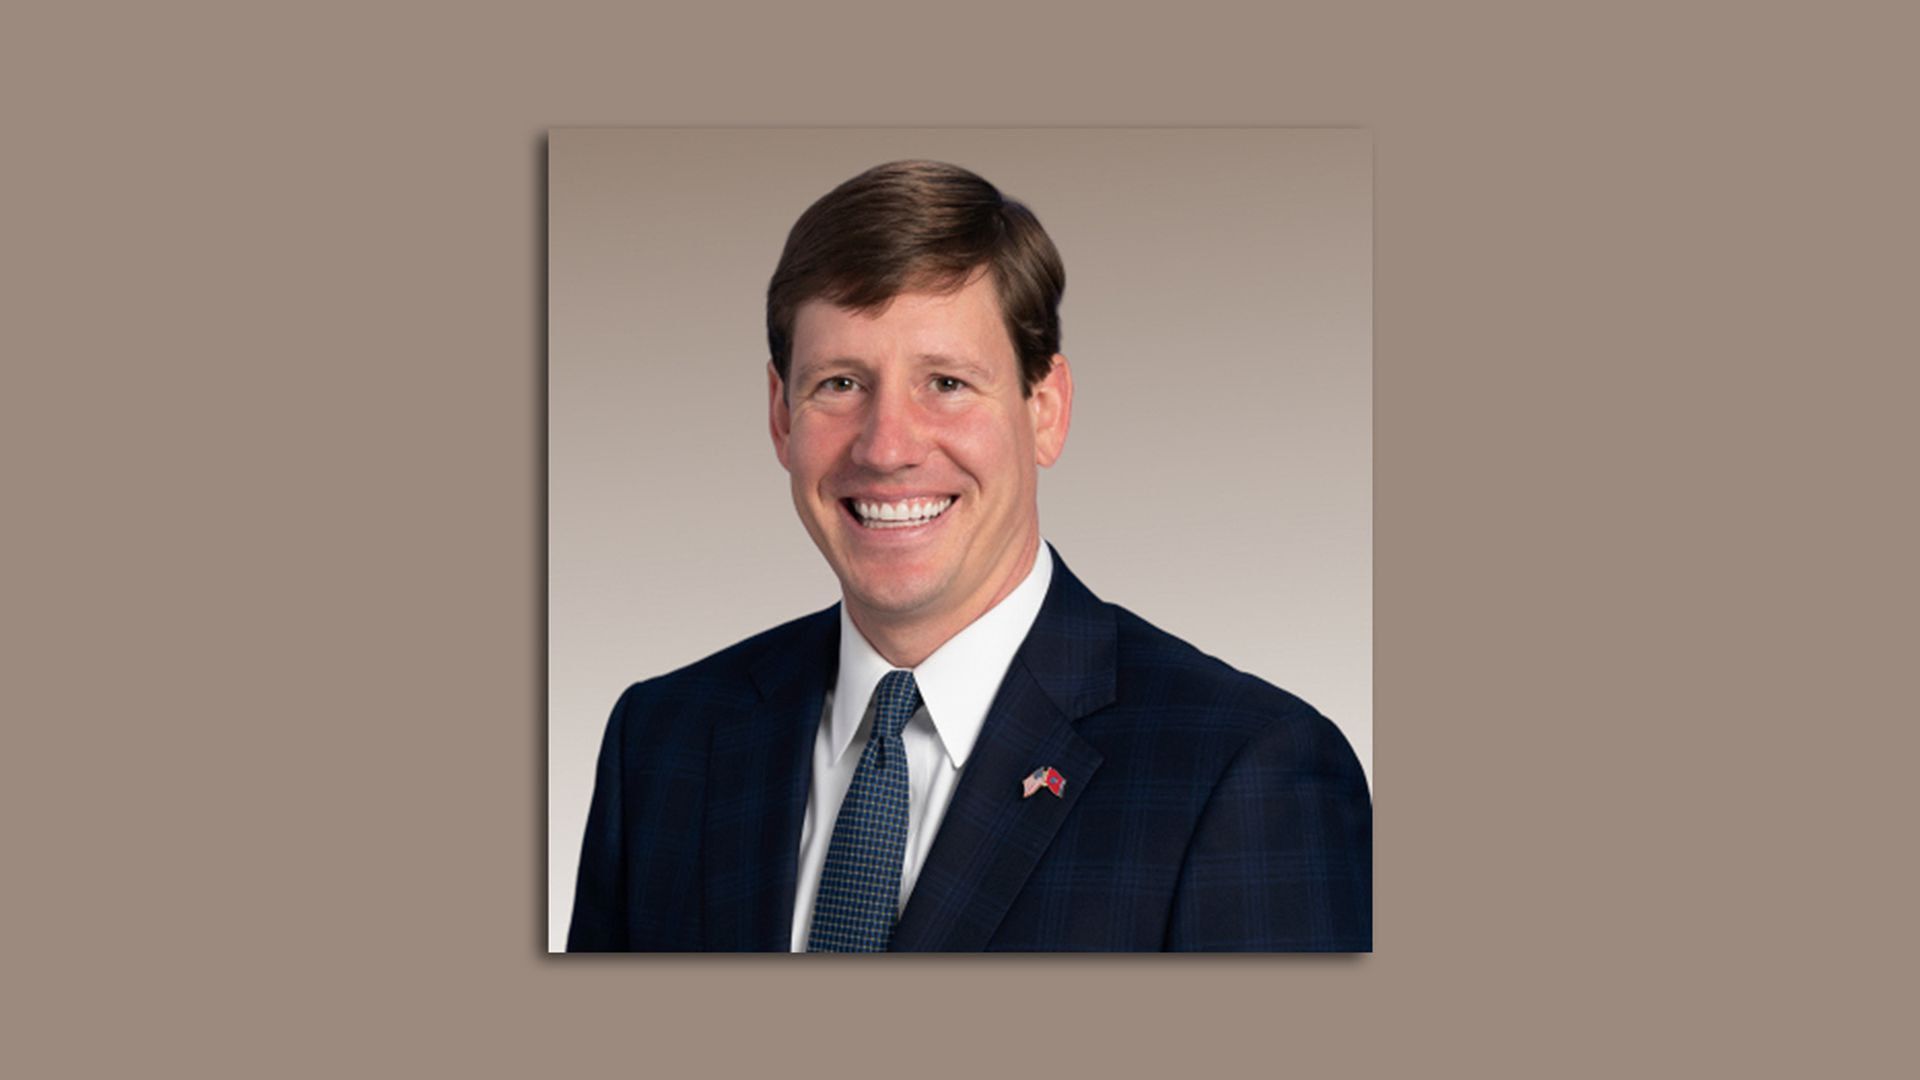 Tennessee state Sen. Brian Kelsey